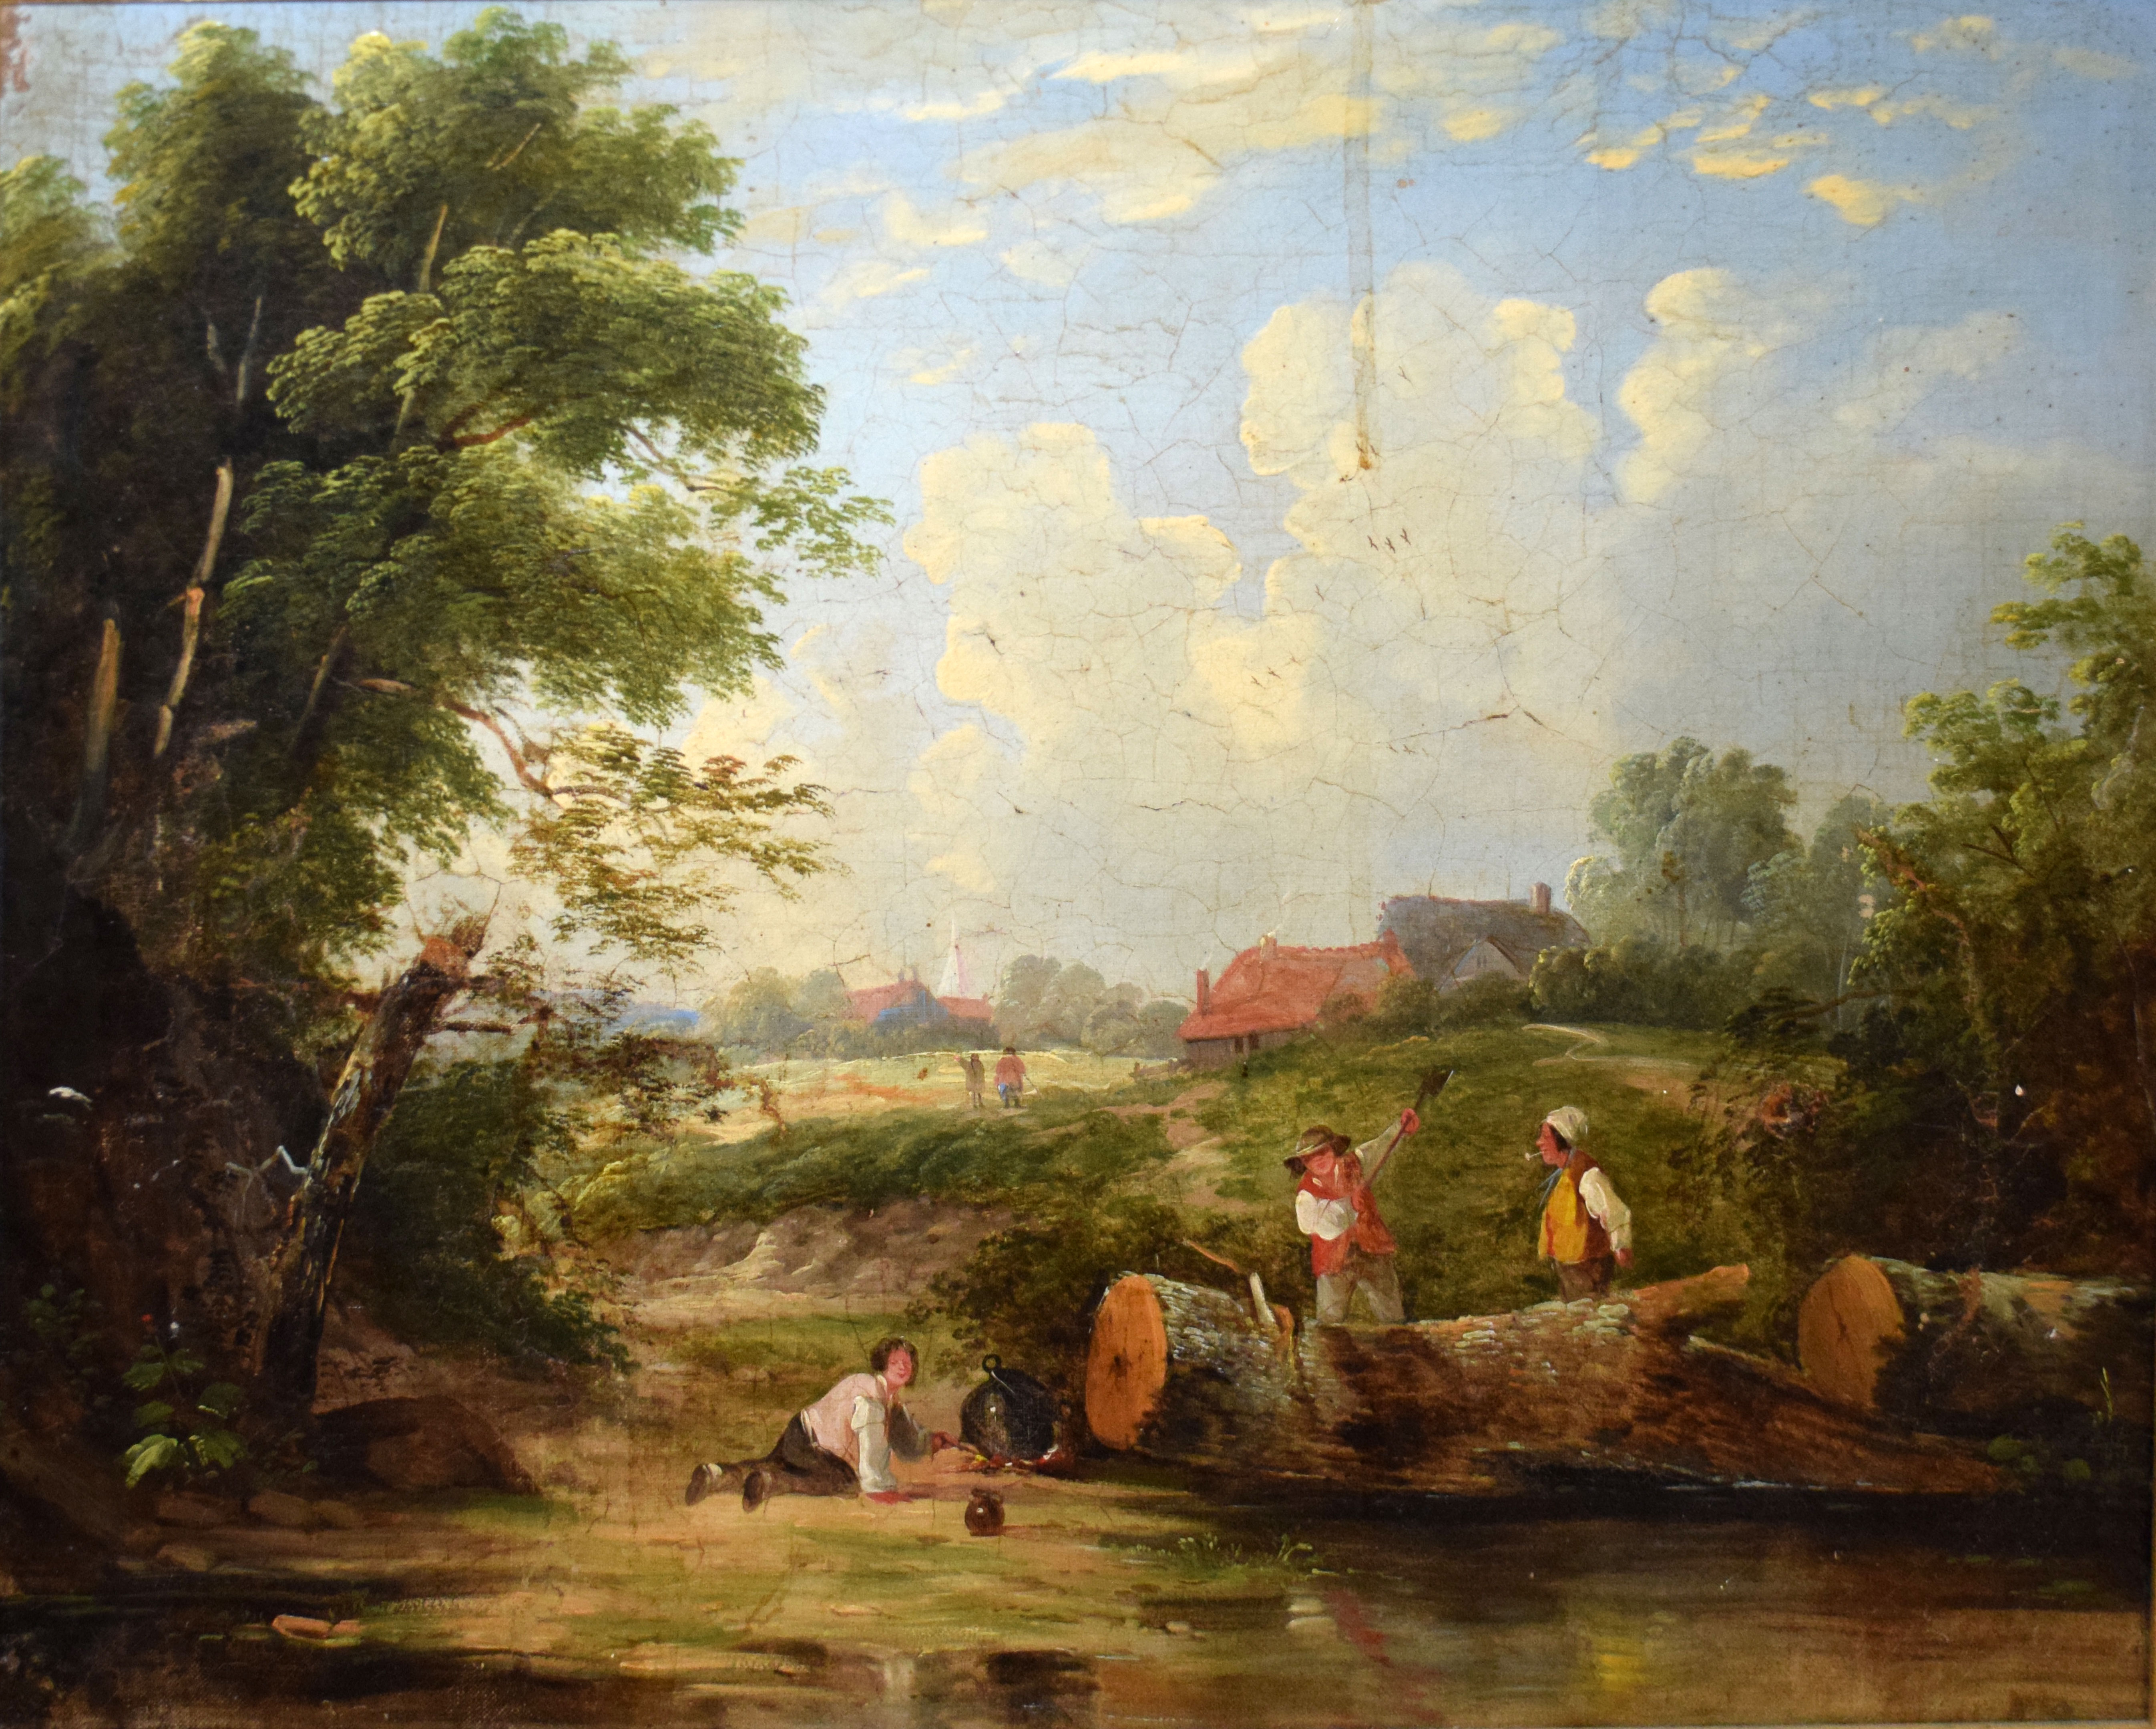 Attributed to Henry J Boddington, The Woodcutters, oil on canvas, 45 x 55cm